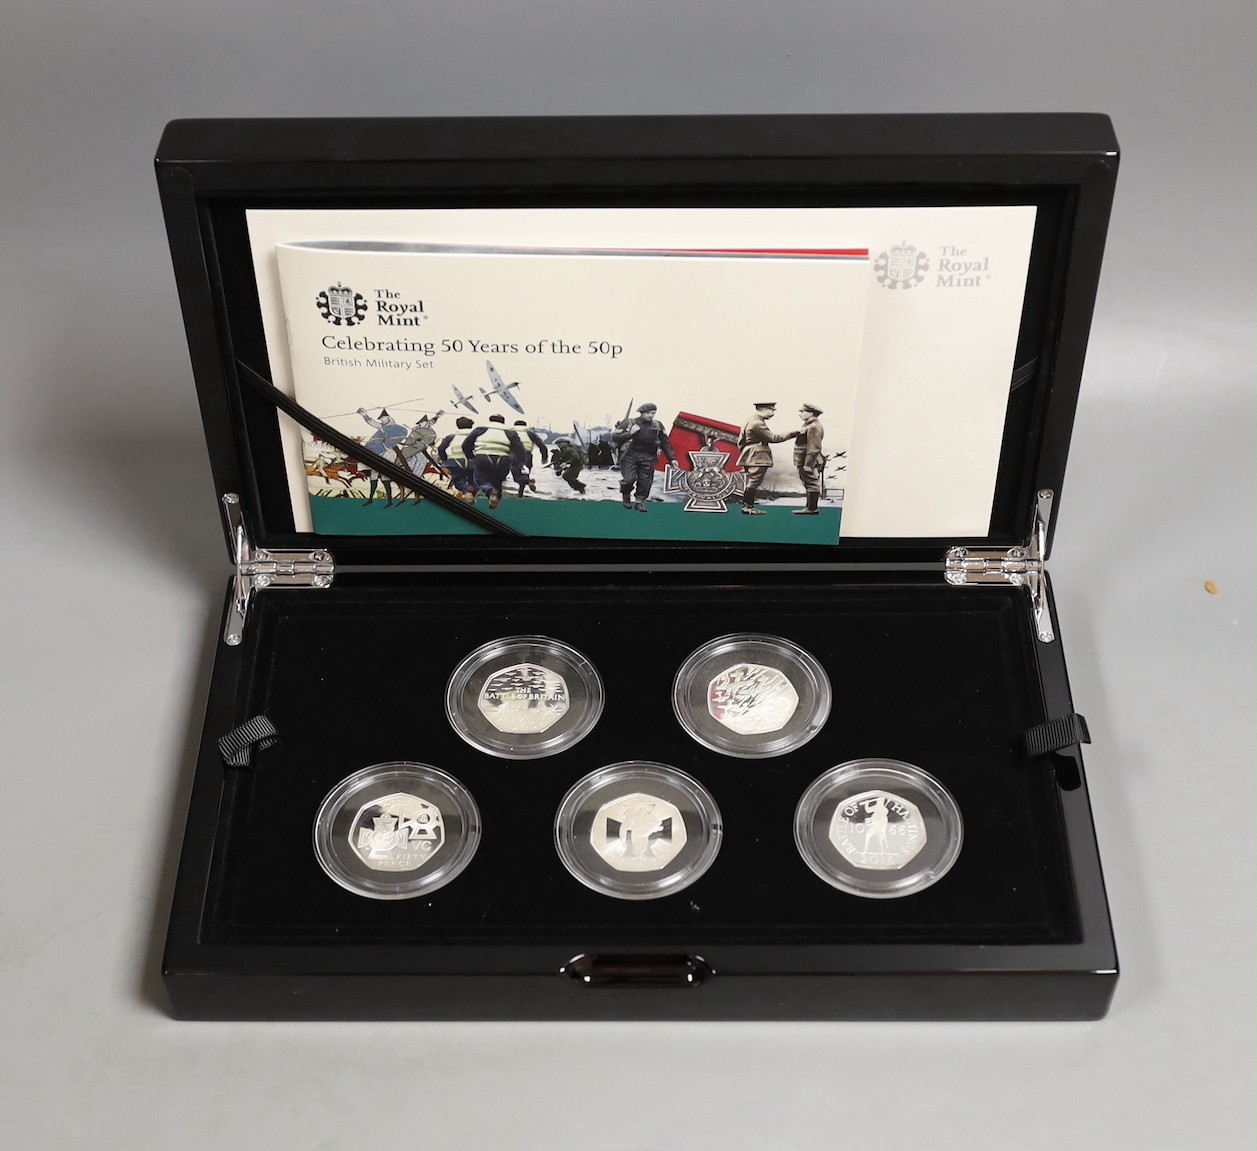 UK Royal Mint commemorative silver proof five 50p coin set, 'Celebrating 50 years of the 50p British Military set', limited edition number 137 of 1969, cased with certificate